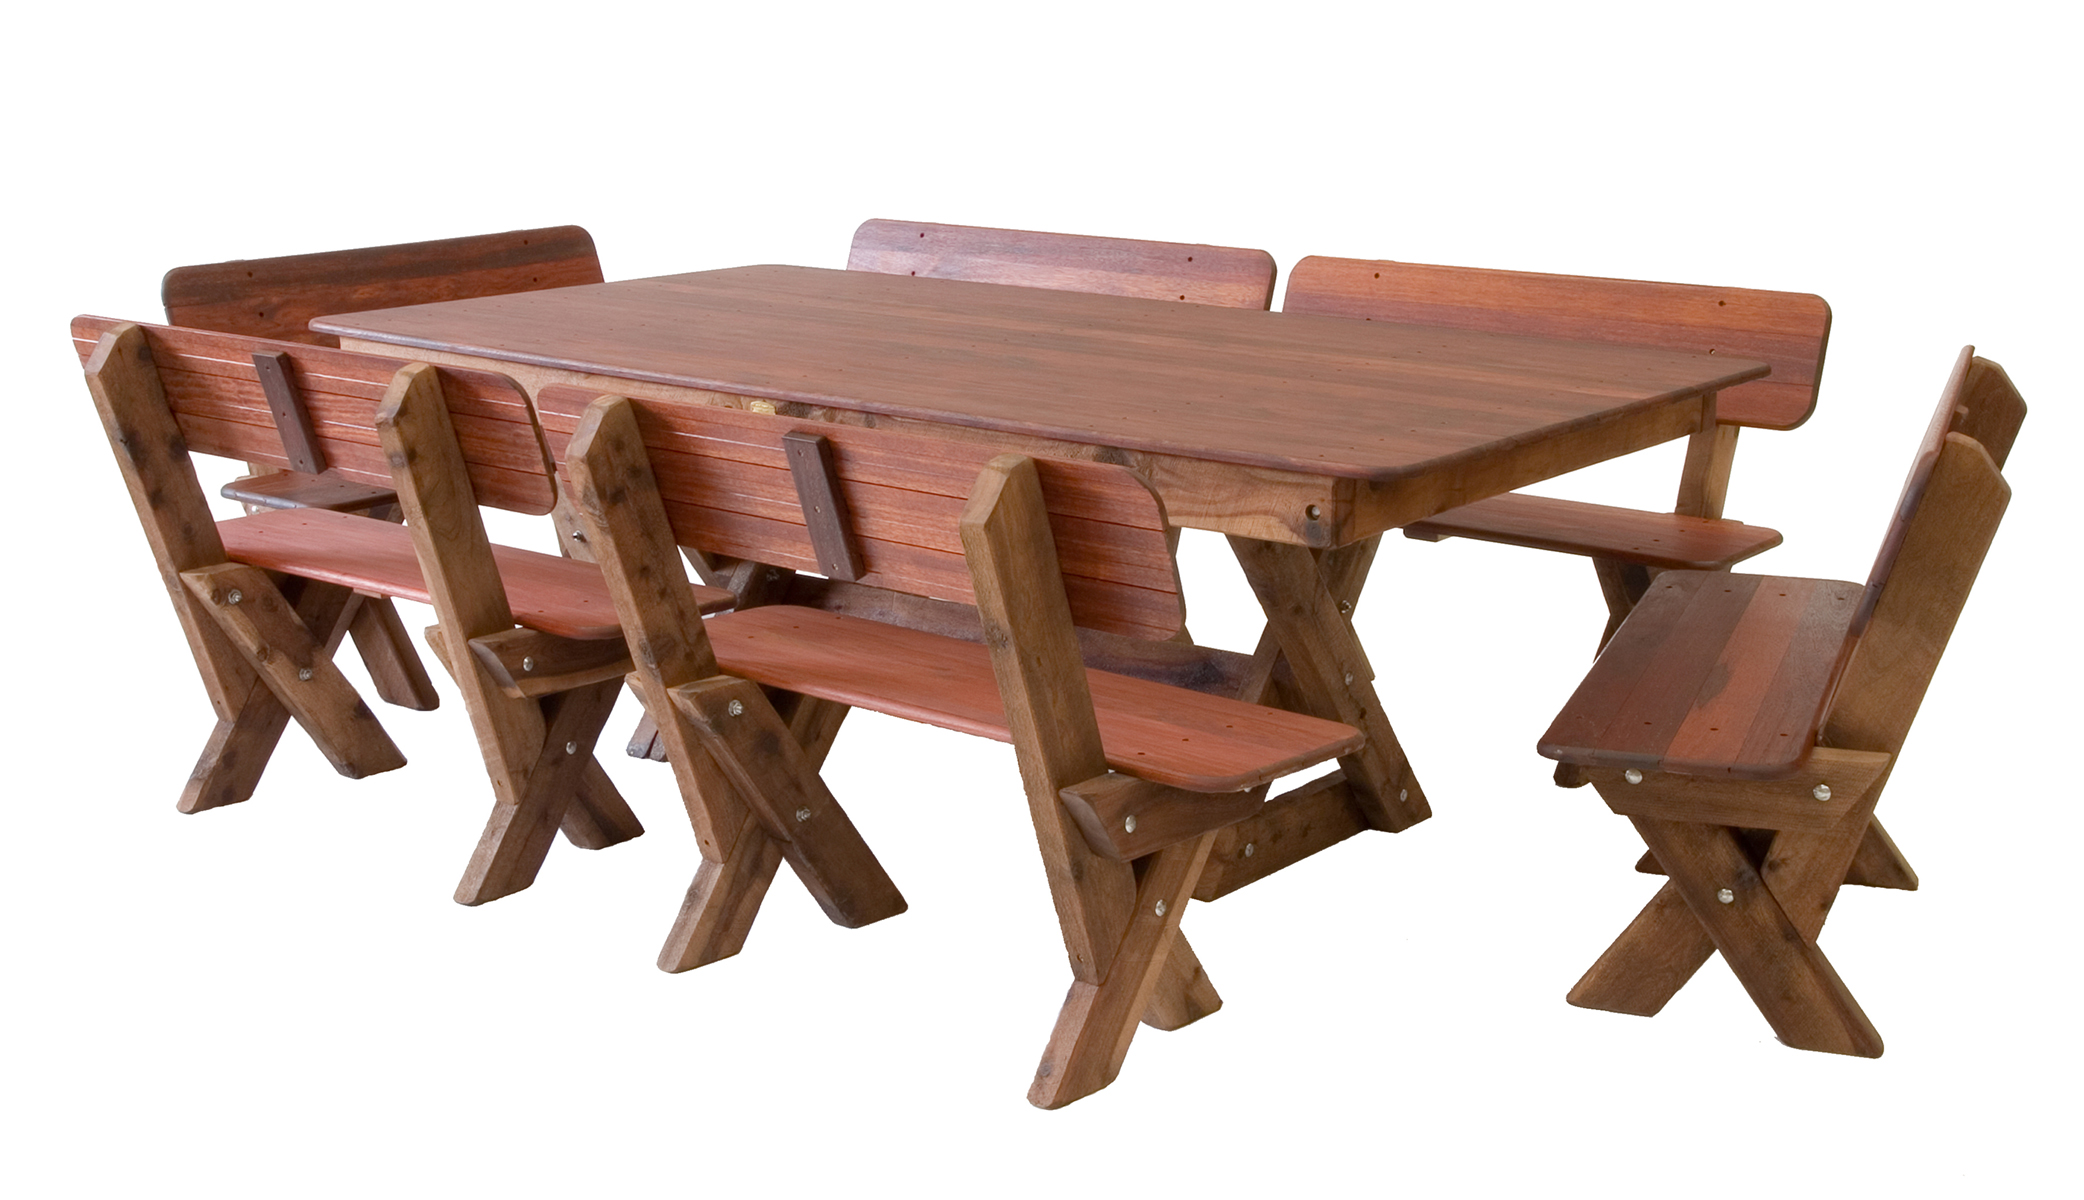 Yamba High Back Kwila Outdoor Timber Setting available to order now